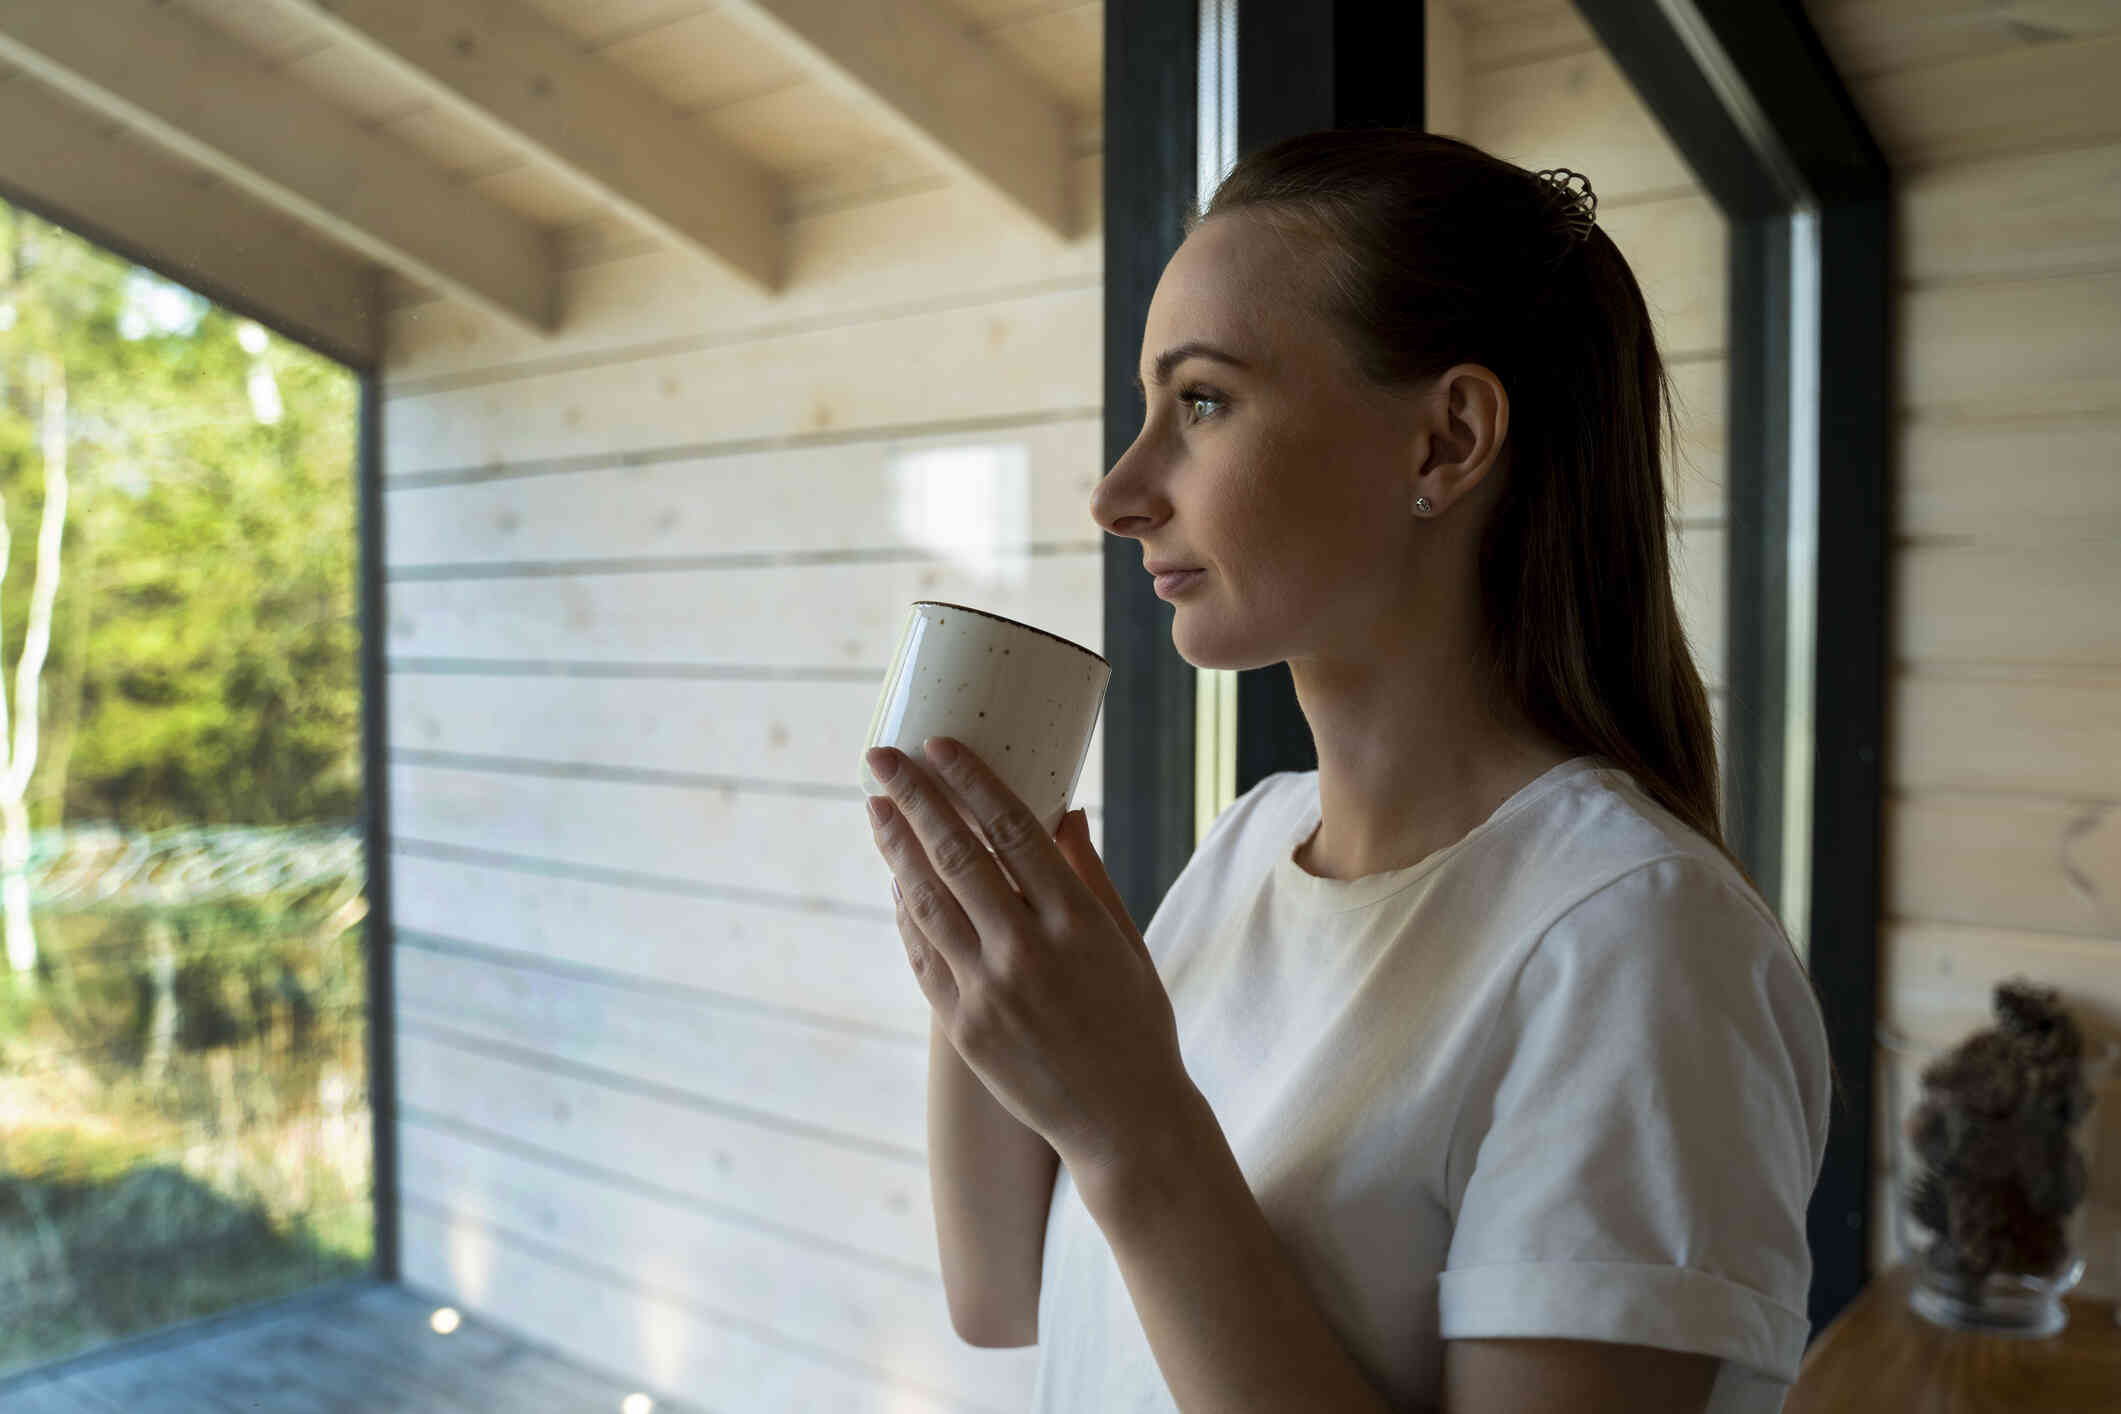 A woman in a white shirt stands near a window in her home and holds a white coffee mug near her face as she gazes out of the window while deep in thought.